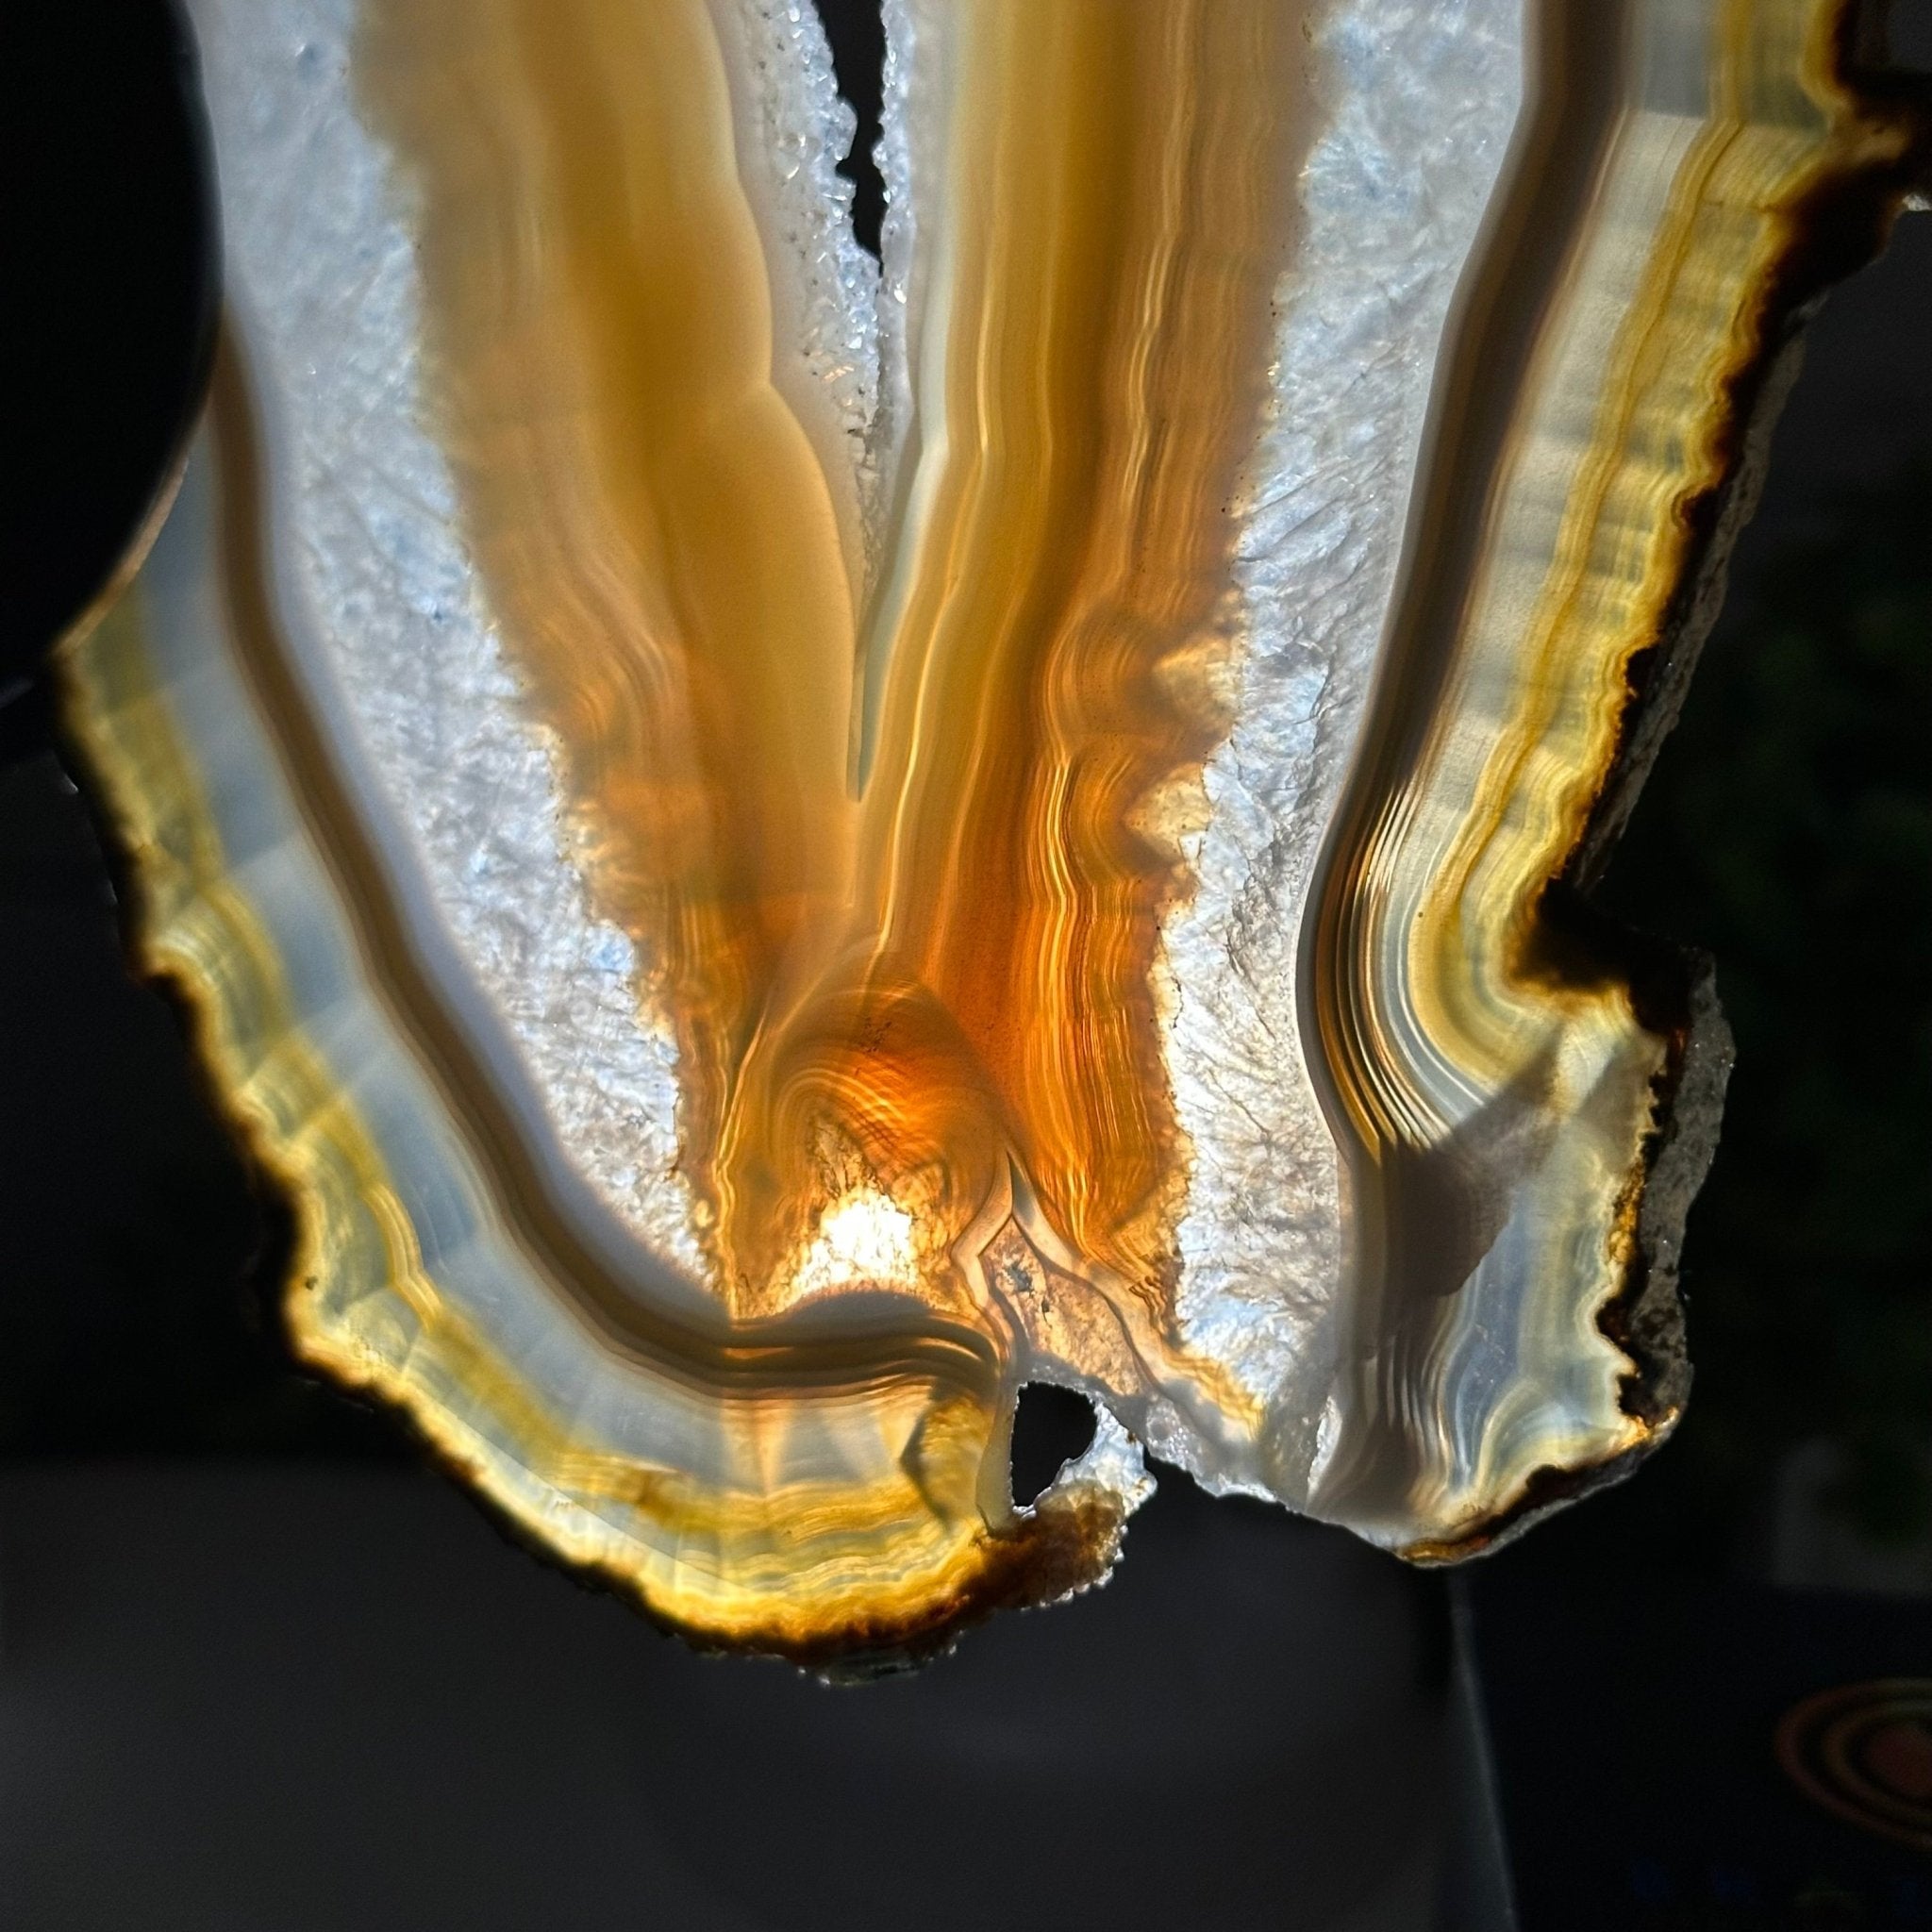 Natural Brazilian Agate "Butterfly Wings", 10.4" Tall #5050NA-118 - Brazil GemsBrazil GemsNatural Brazilian Agate "Butterfly Wings", 10.4" Tall #5050NA-118Agate Butterfly Wings5050NA-118